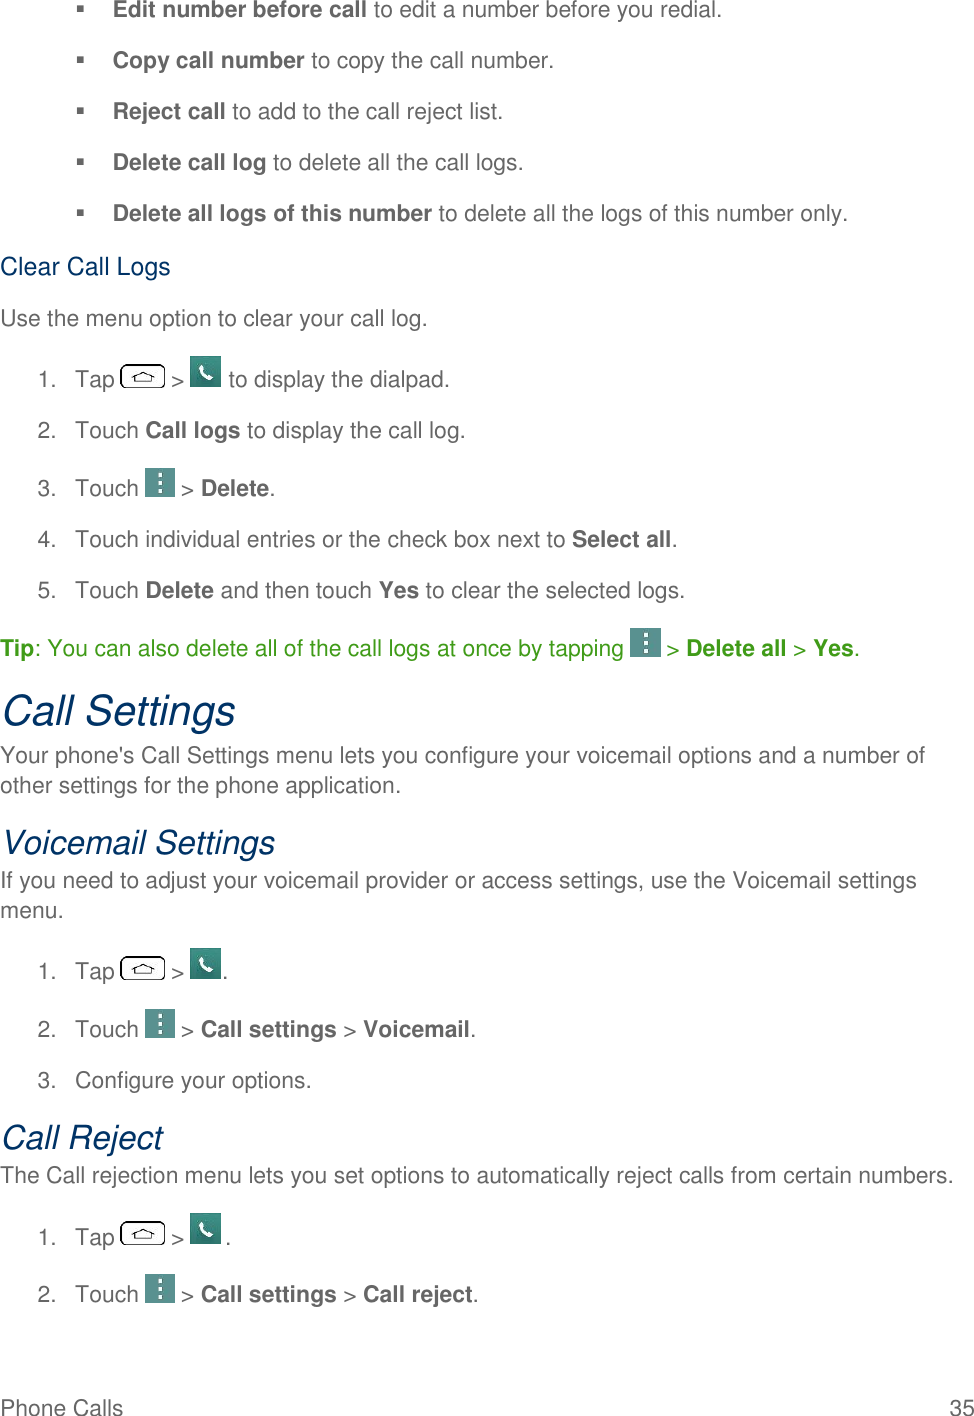 Phone Calls  35  Edit number before call to edit a number before you redial.   Copy call number to copy the call number.   Reject call to add to the call reject list.   Delete call log to delete all the call logs.   Delete all logs of this number to delete all the logs of this number only. Clear Call Logs Use the menu option to clear your call log. 1.  Tap   &gt;   to display the dialpad. 2.  Touch Call logs to display the call log. 3.  Touch   &gt; Delete. 4.  Touch individual entries or the check box next to Select all. 5.  Touch Delete and then touch Yes to clear the selected logs. Tip: You can also delete all of the call logs at once by tapping   &gt; Delete all &gt; Yes. Call Settings Your phone&apos;s Call Settings menu lets you configure your voicemail options and a number of other settings for the phone application. Voicemail Settings If you need to adjust your voicemail provider or access settings, use the Voicemail settings menu. 1.  Tap   &gt;  . 2.  Touch   &gt; Call settings &gt; Voicemail. 3.  Configure your options. Call Reject The Call rejection menu lets you set options to automatically reject calls from certain numbers. 1.  Tap   &gt;   . 2.  Touch   &gt; Call settings &gt; Call reject. 